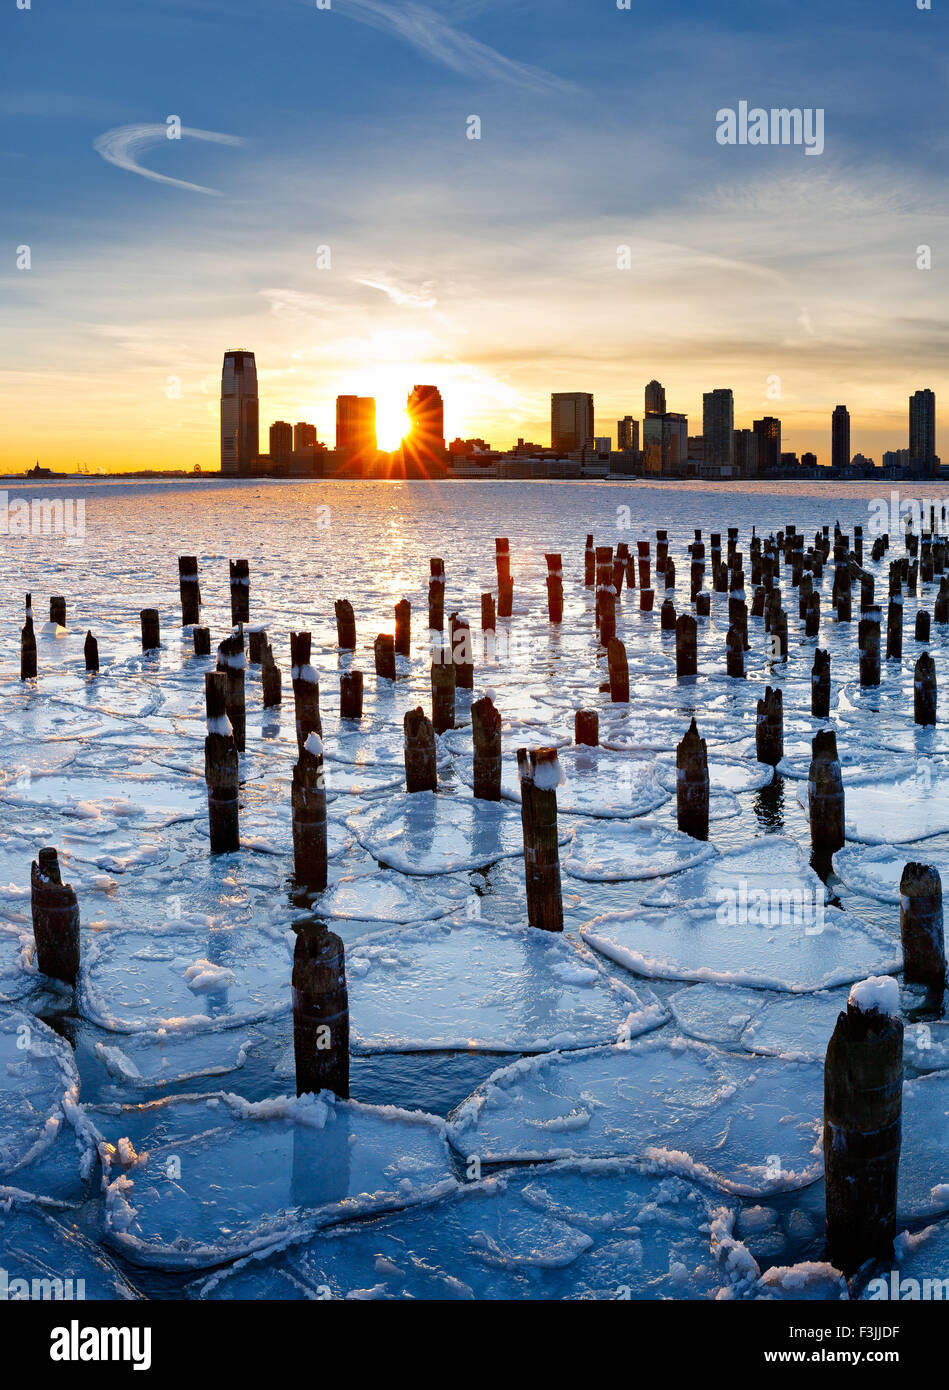 Wood pilings from New York old pier sticking out through the ice on Hudson River at sunset with Jersey City buildings Stock Photo